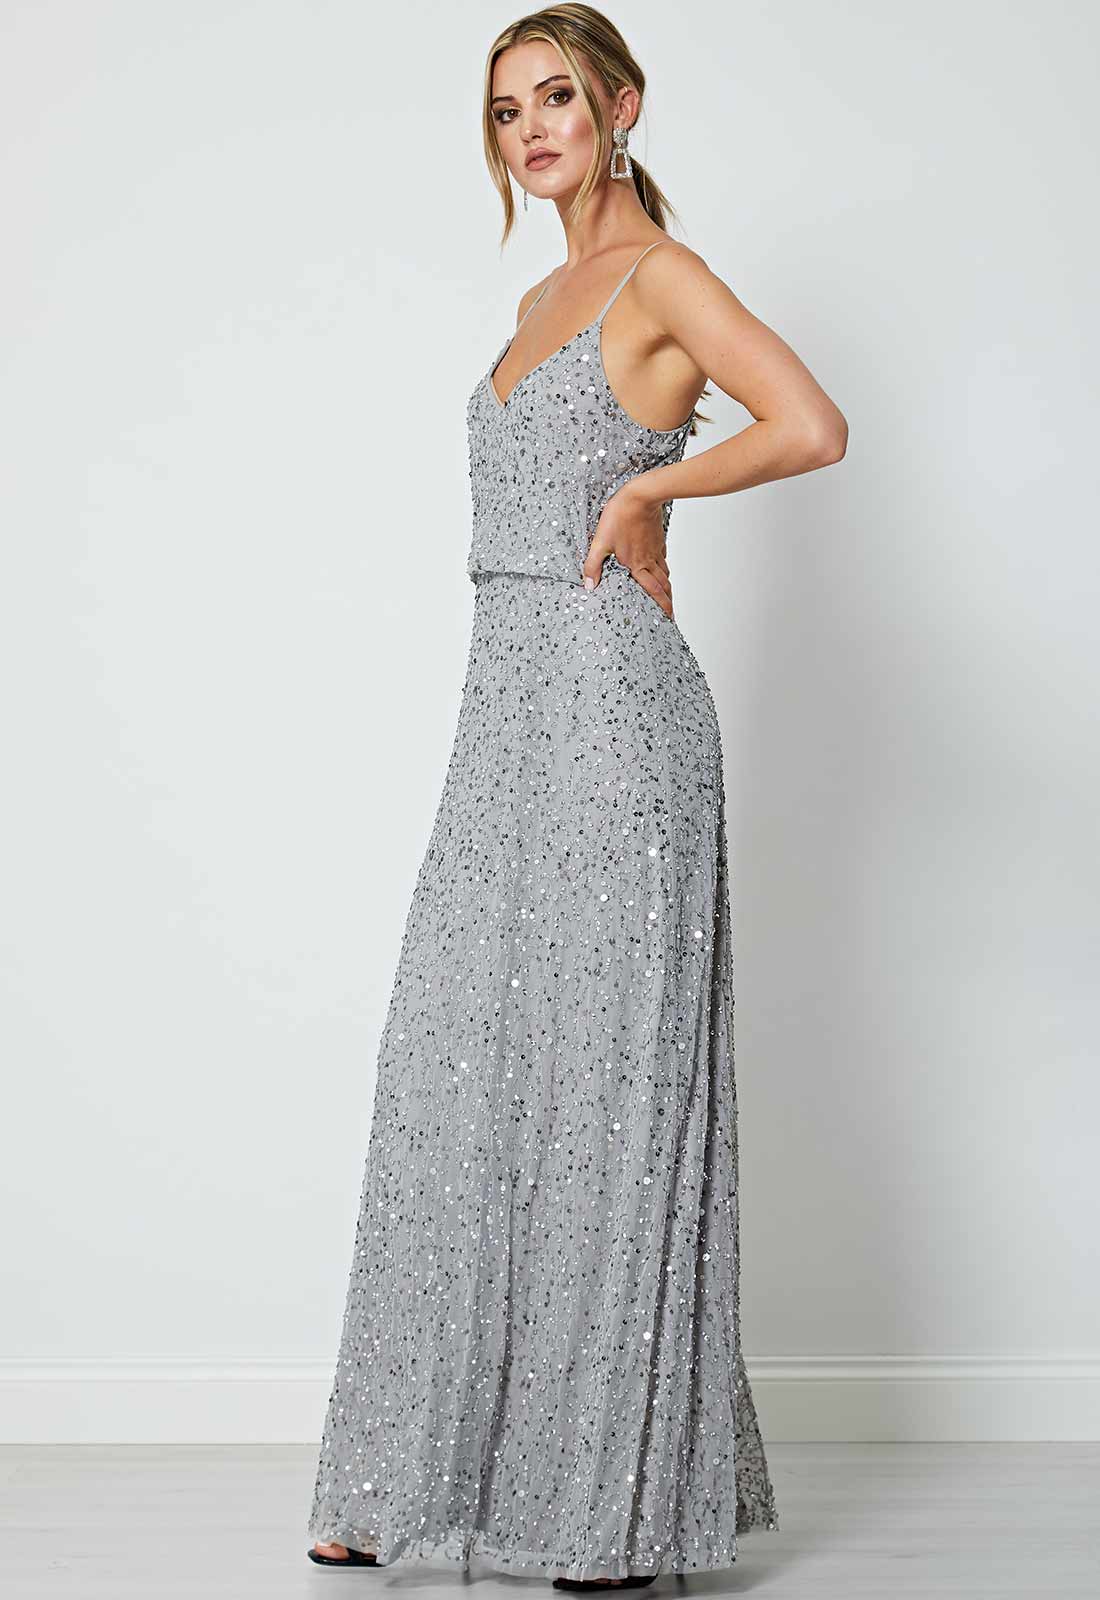 ANGELEYE Silver Lucy Embellished Maxi Dress-73685